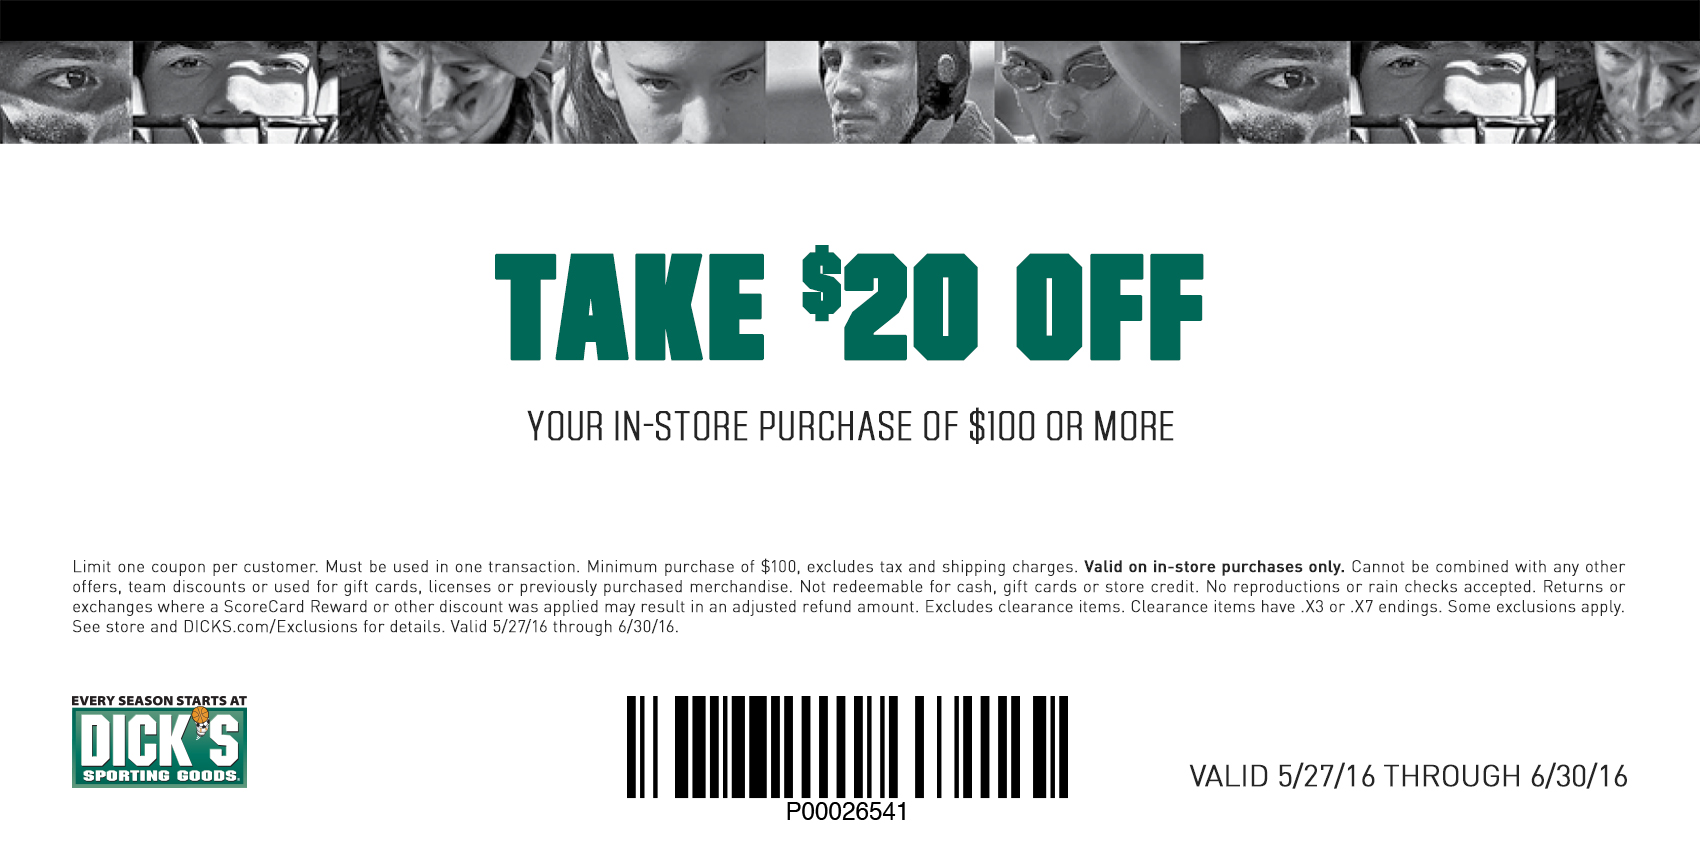 Limit one coupon per customer. Must be used in one transaction.
					Minimum purchase of $100, excludes tax and shipping charges. Valid on in-store purchases only. Cannot be combined with any other offers, 
					team discounts or used for gift cards, licenses or previously purchased merchandise. Not redeemable for cash, gift cards or store credit.
					No reproductions or rain checks accepted. Returns or exchanges where a ScoreCard Reward or other discount was applied may result in an adjusted refund amount. 
					Excludes clearance items. Clearance items have .X3 or .X7 endings. Some exclusions apply.  See store and DICKS.com/Exclusions for details.
					Valid 5/27/16 through 6/30/16.